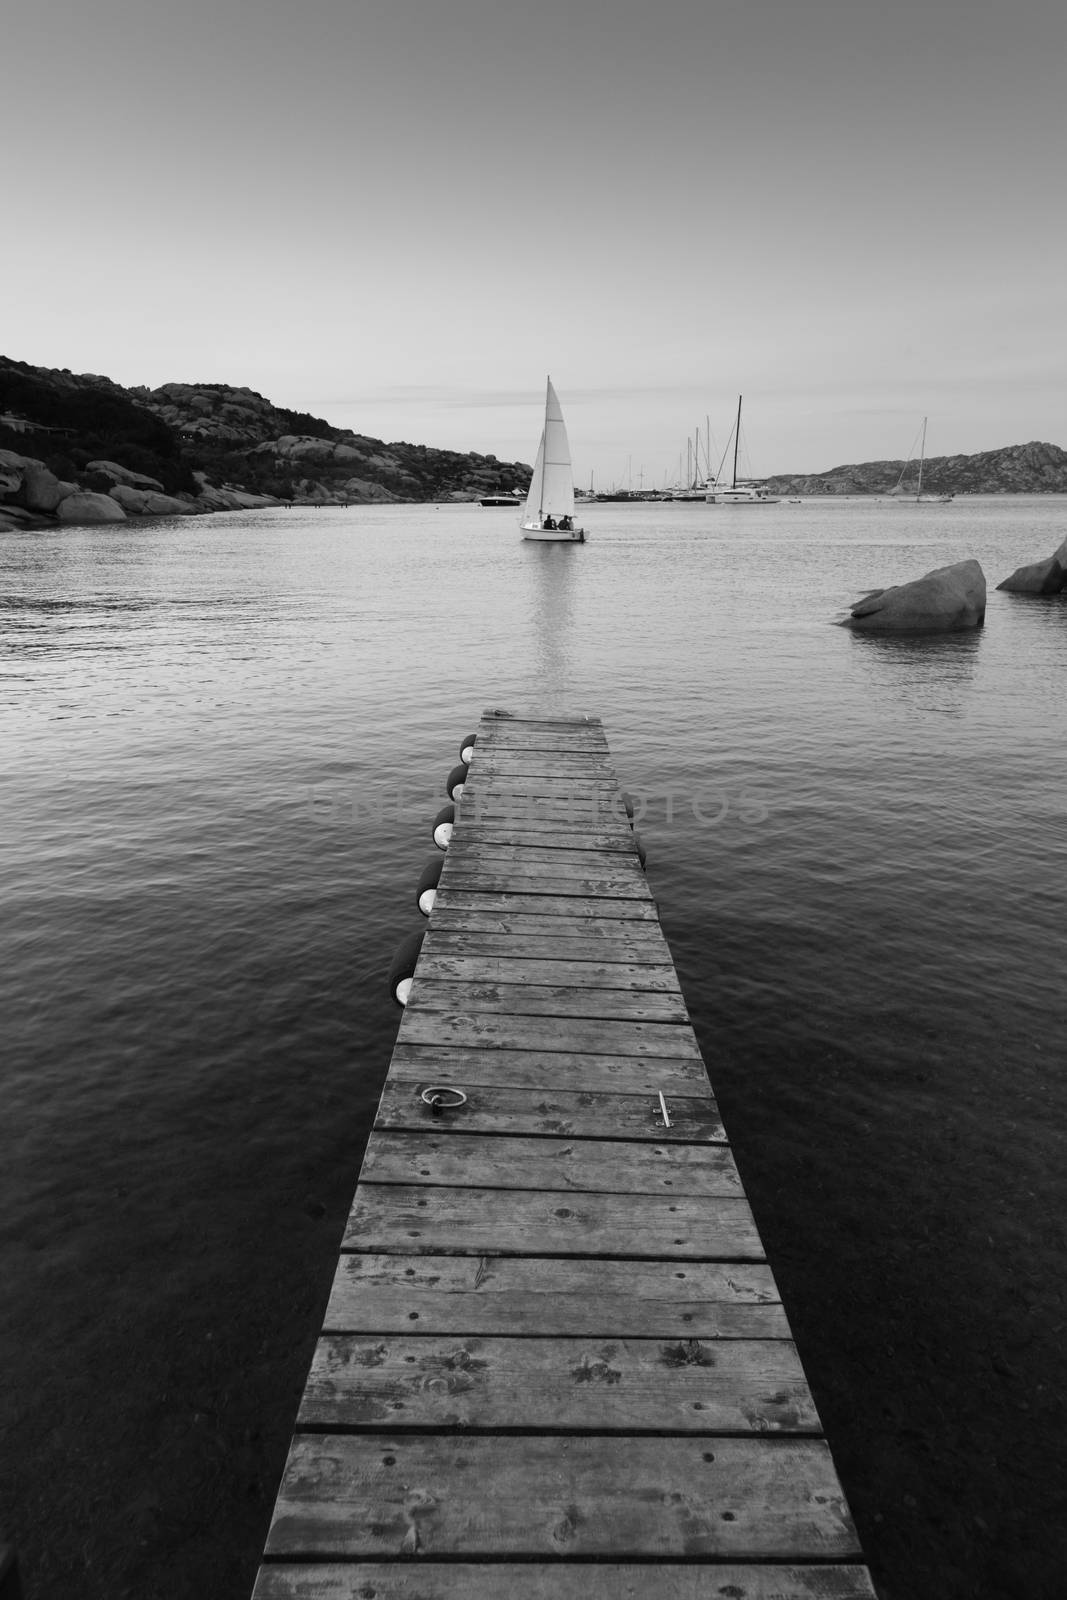 Wooden pier and sailboats sailing in evening calm sea of marvellous Porto Rafael, Costa Smeralda, Sardinia, Italy. Symbol for relaxation, wealth, leisure activity by kasto